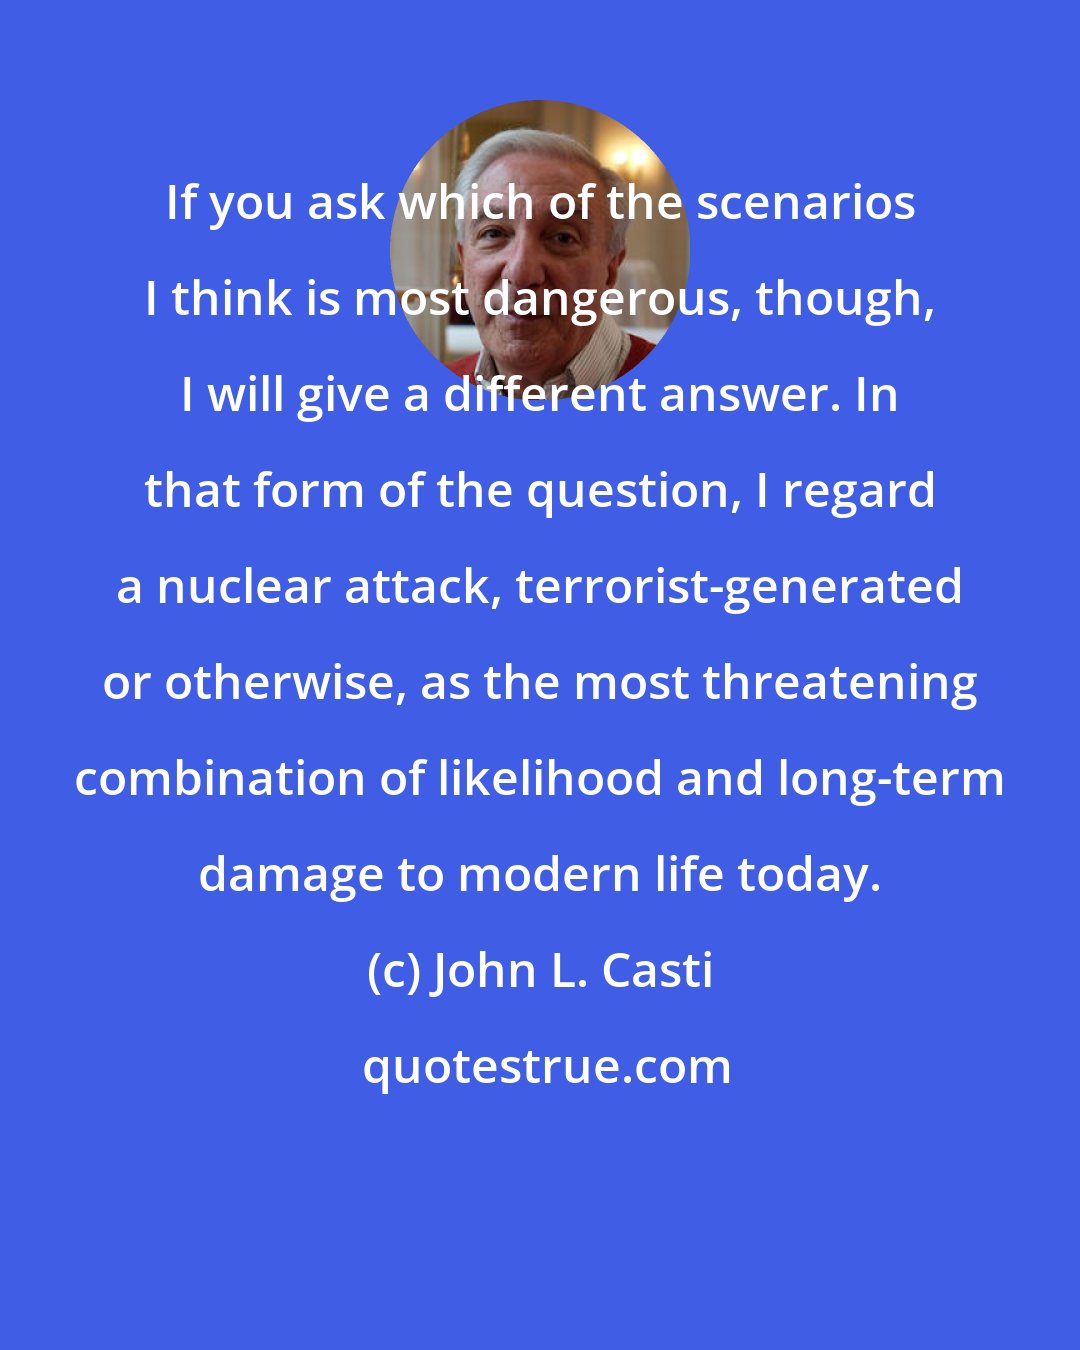 John L. Casti: If you ask which of the scenarios I think is most dangerous, though, I will give a different answer. In that form of the question, I regard a nuclear attack, terrorist-generated or otherwise, as the most threatening combination of likelihood and long-term damage to modern life today.